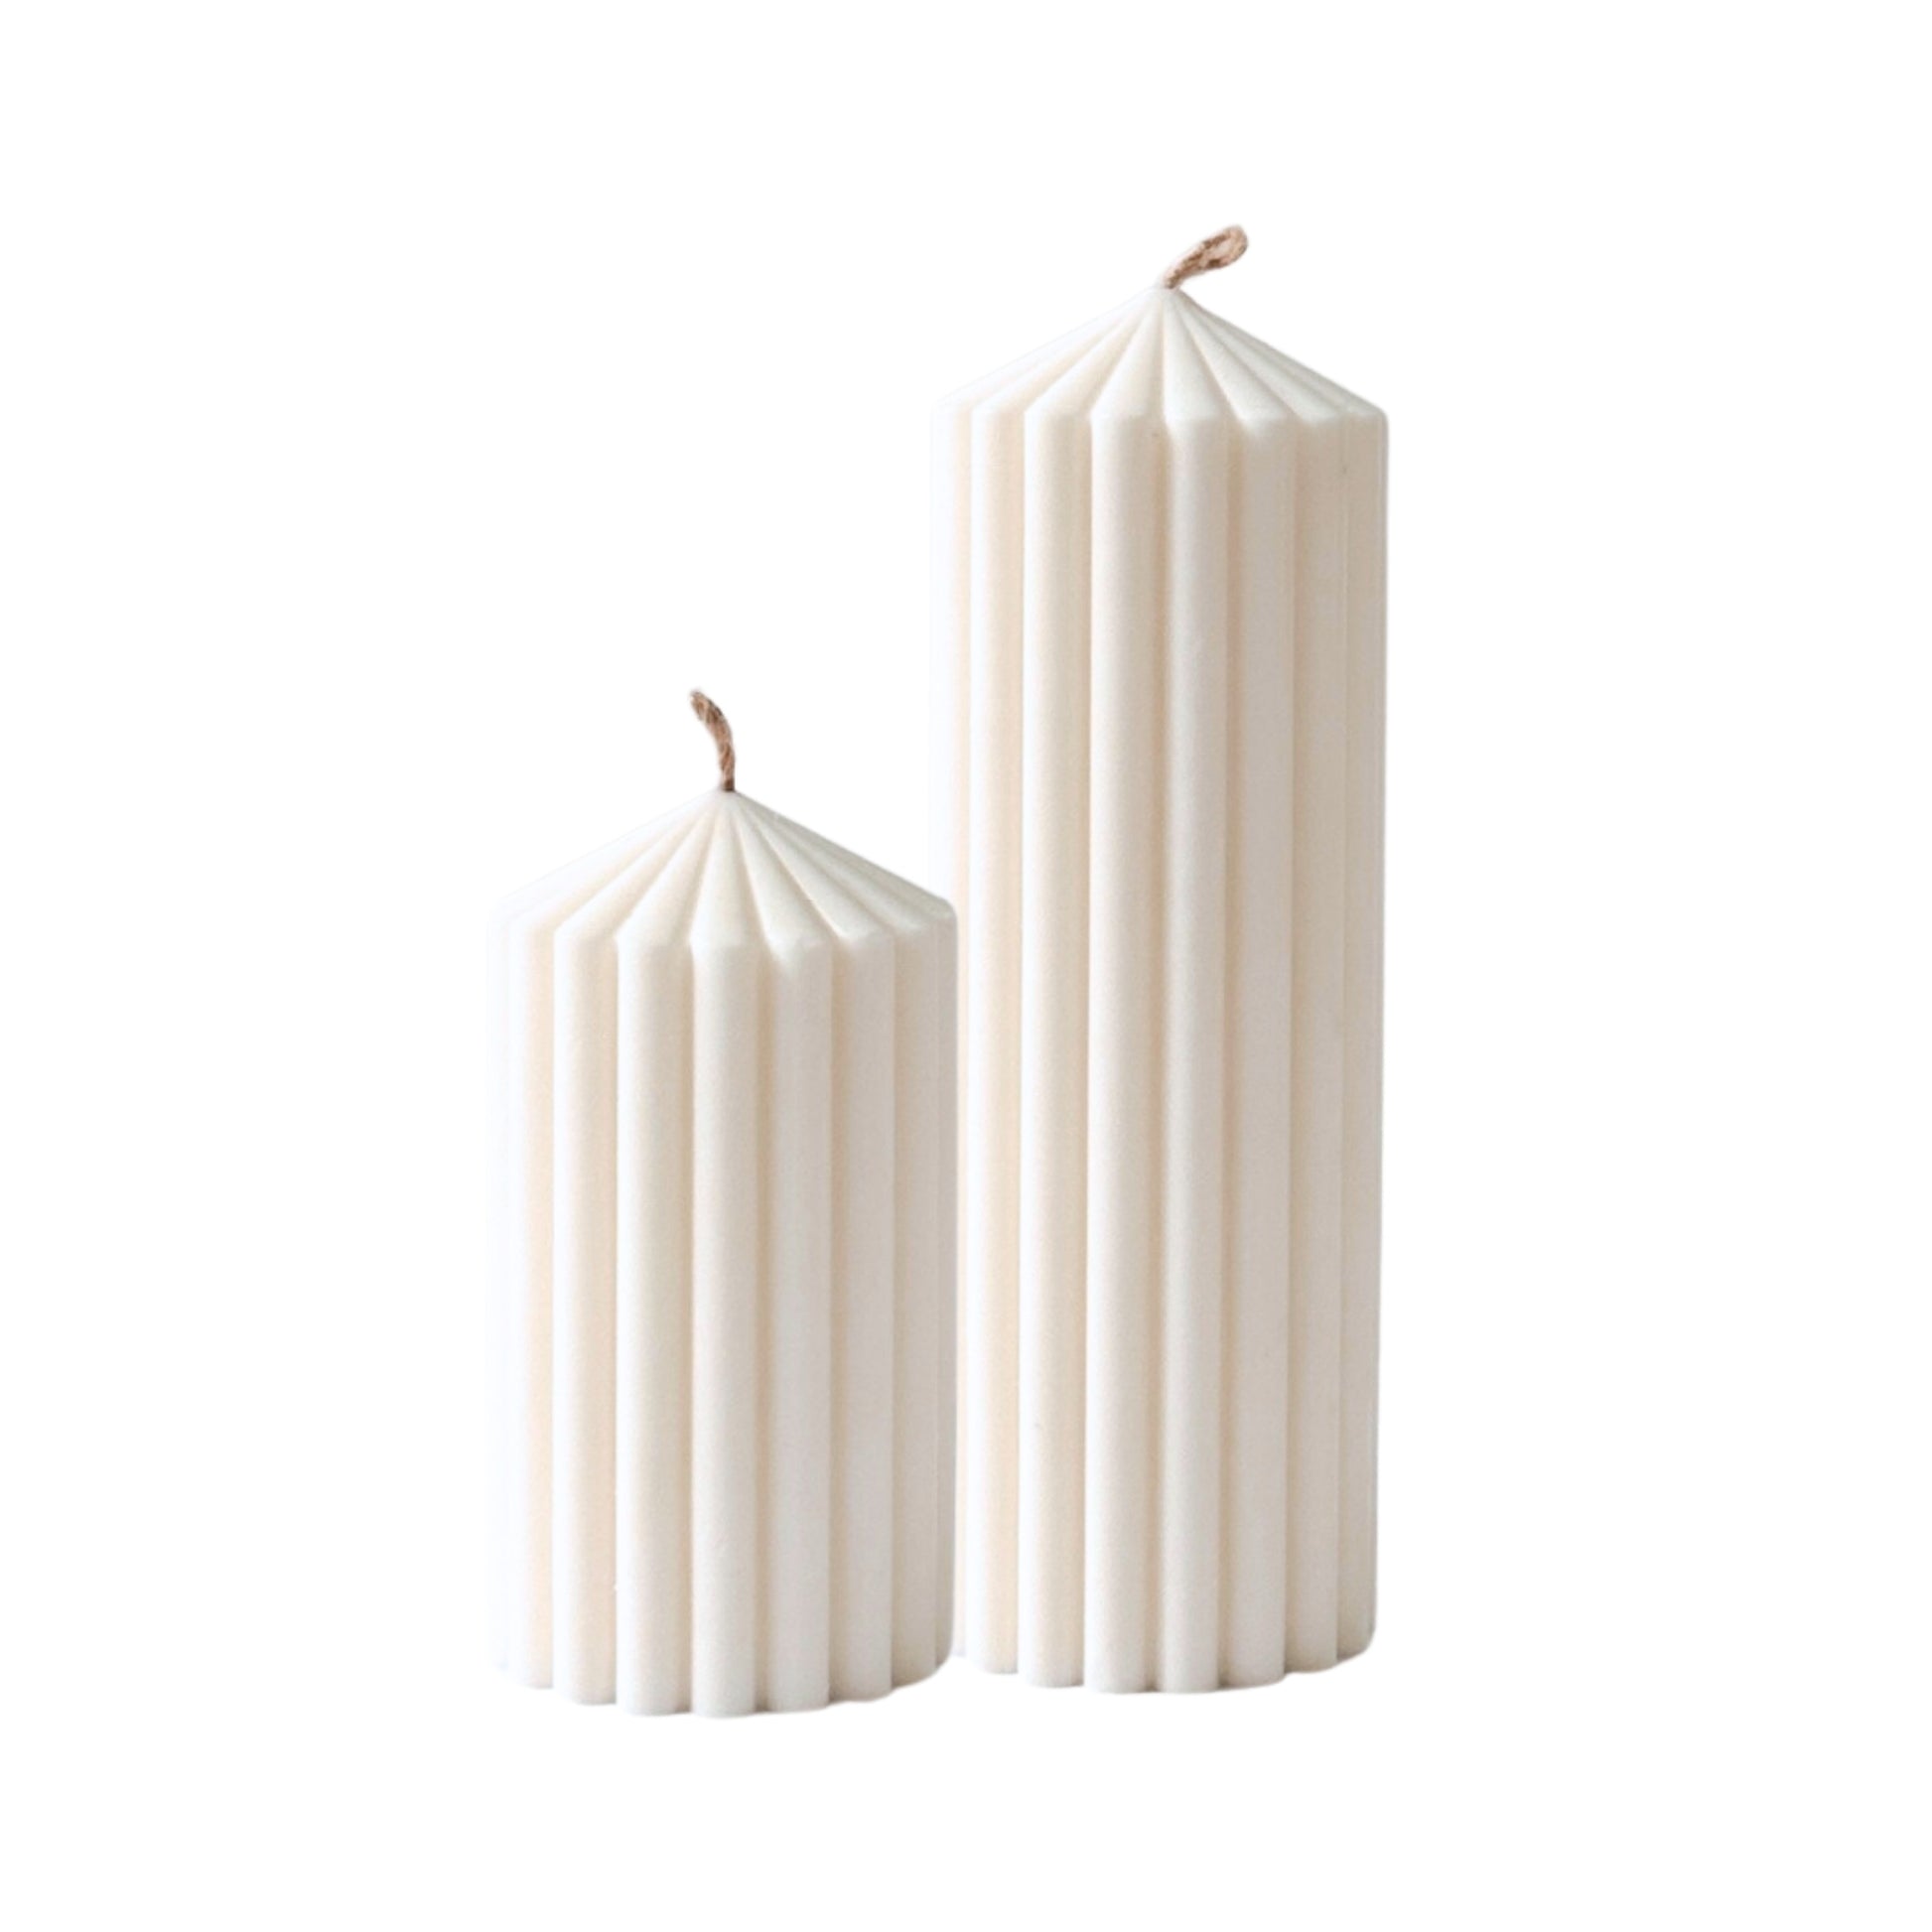 Stripe Duo Candle Set